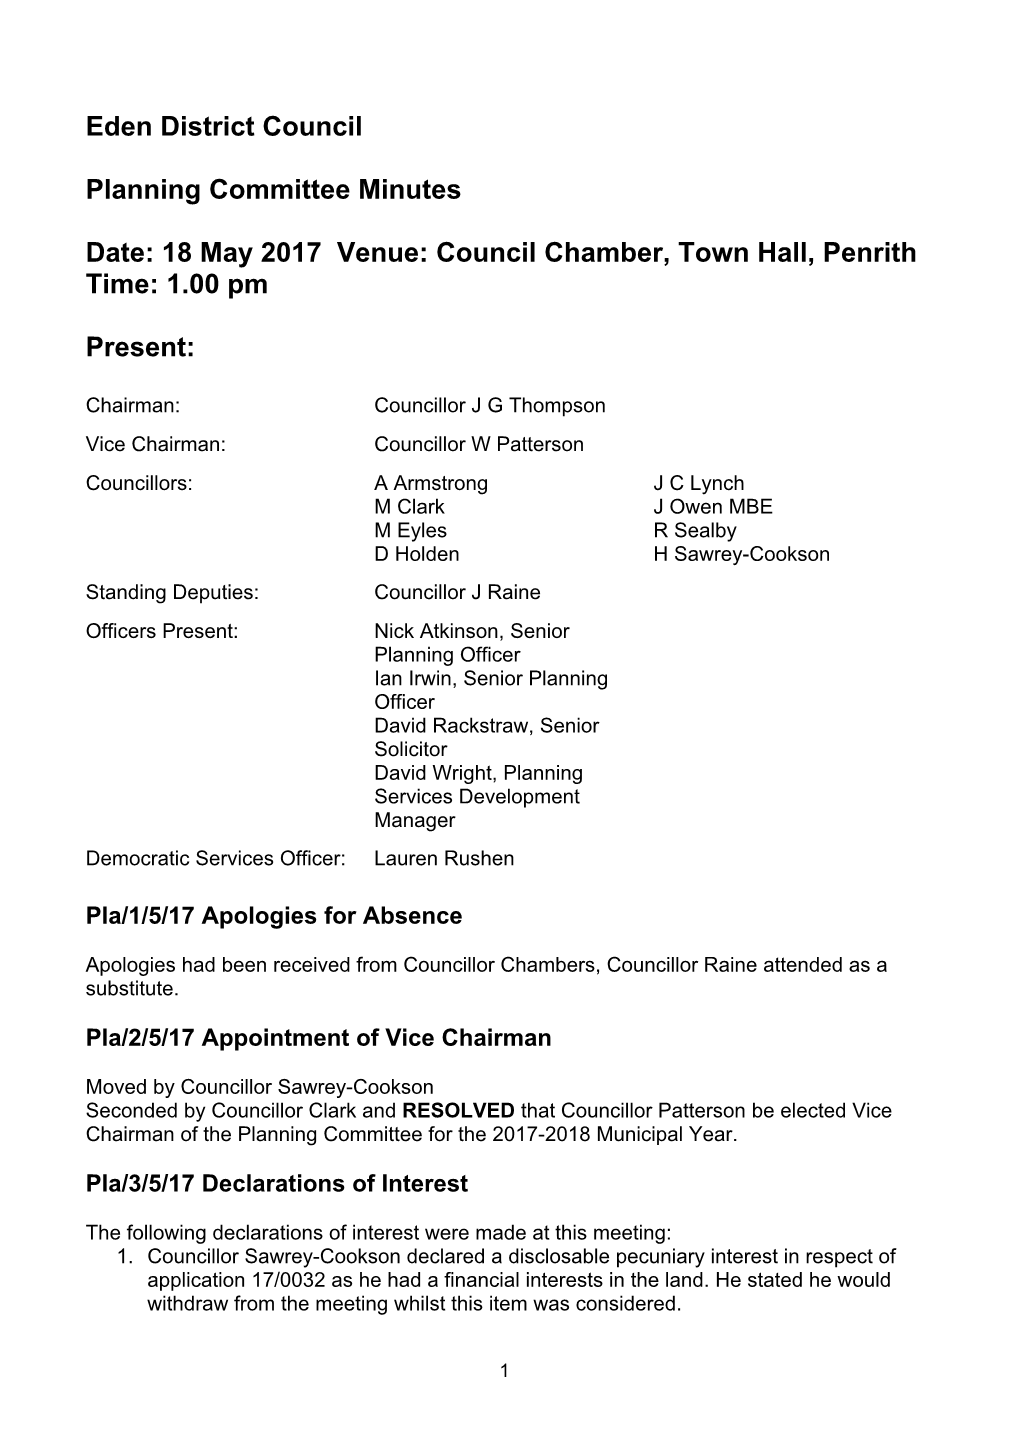 Minutes Document for Planning Committee, 18/05/2017 13:00